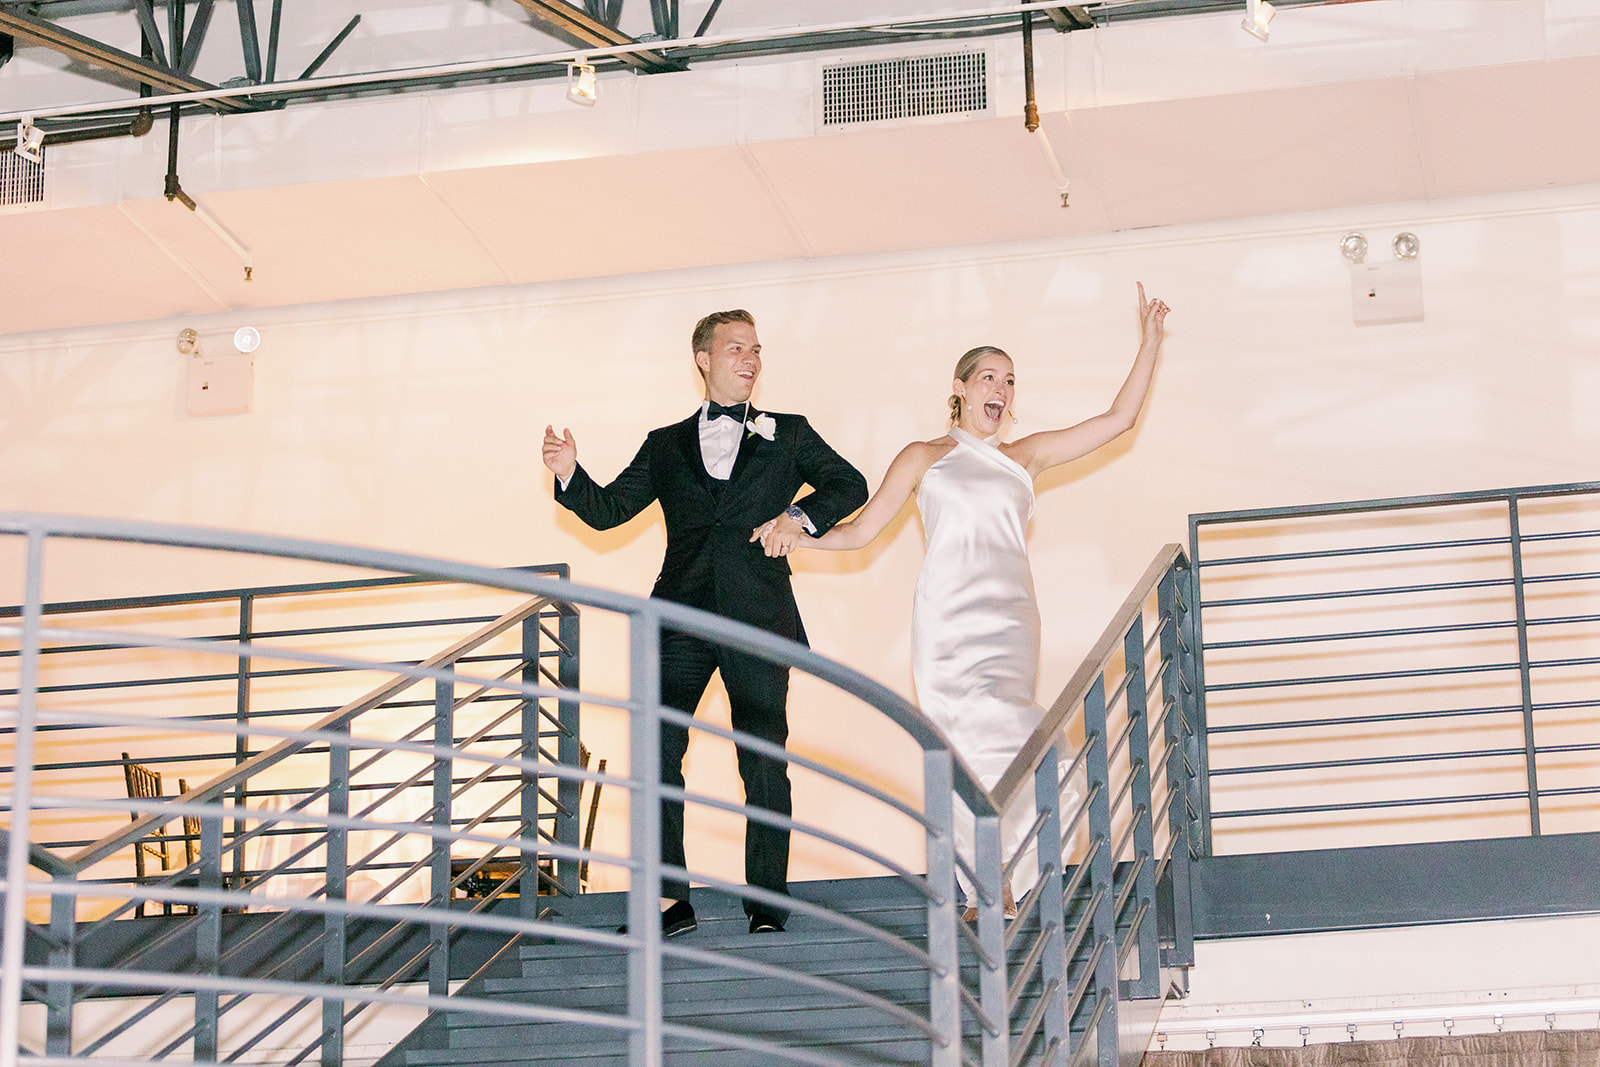 Tribeca Rooftop wedding reception - Bride and groom make a grand entrance on the balcony, kicking off an unforgettable celebration.